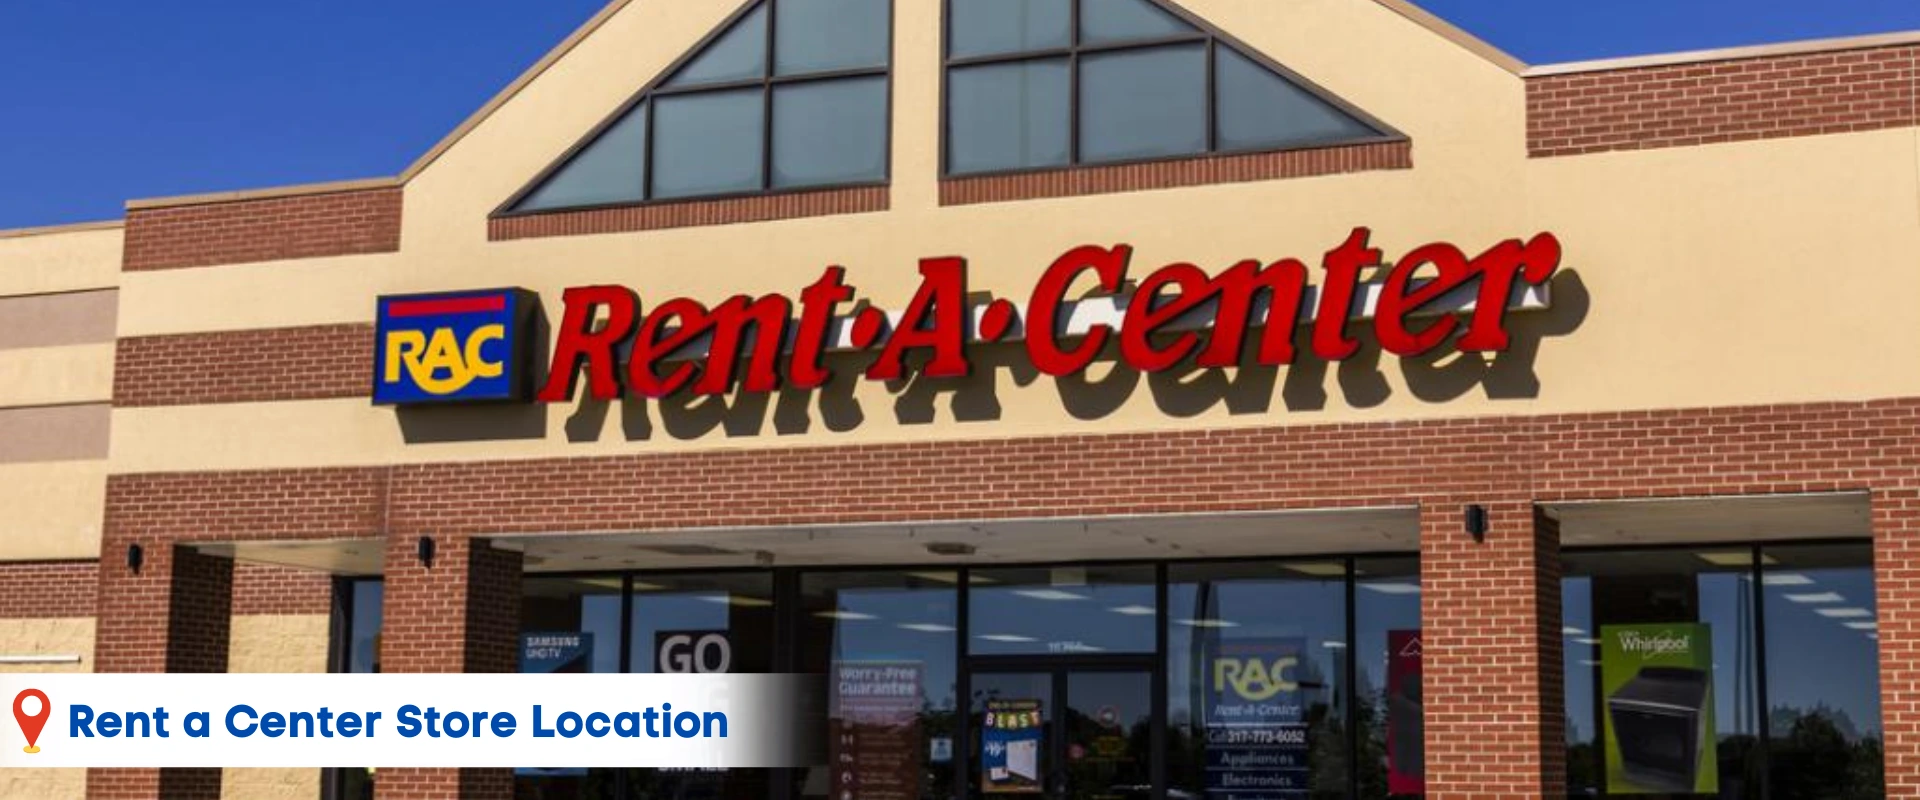 Rent a Center Near Me in Carson City, NV.